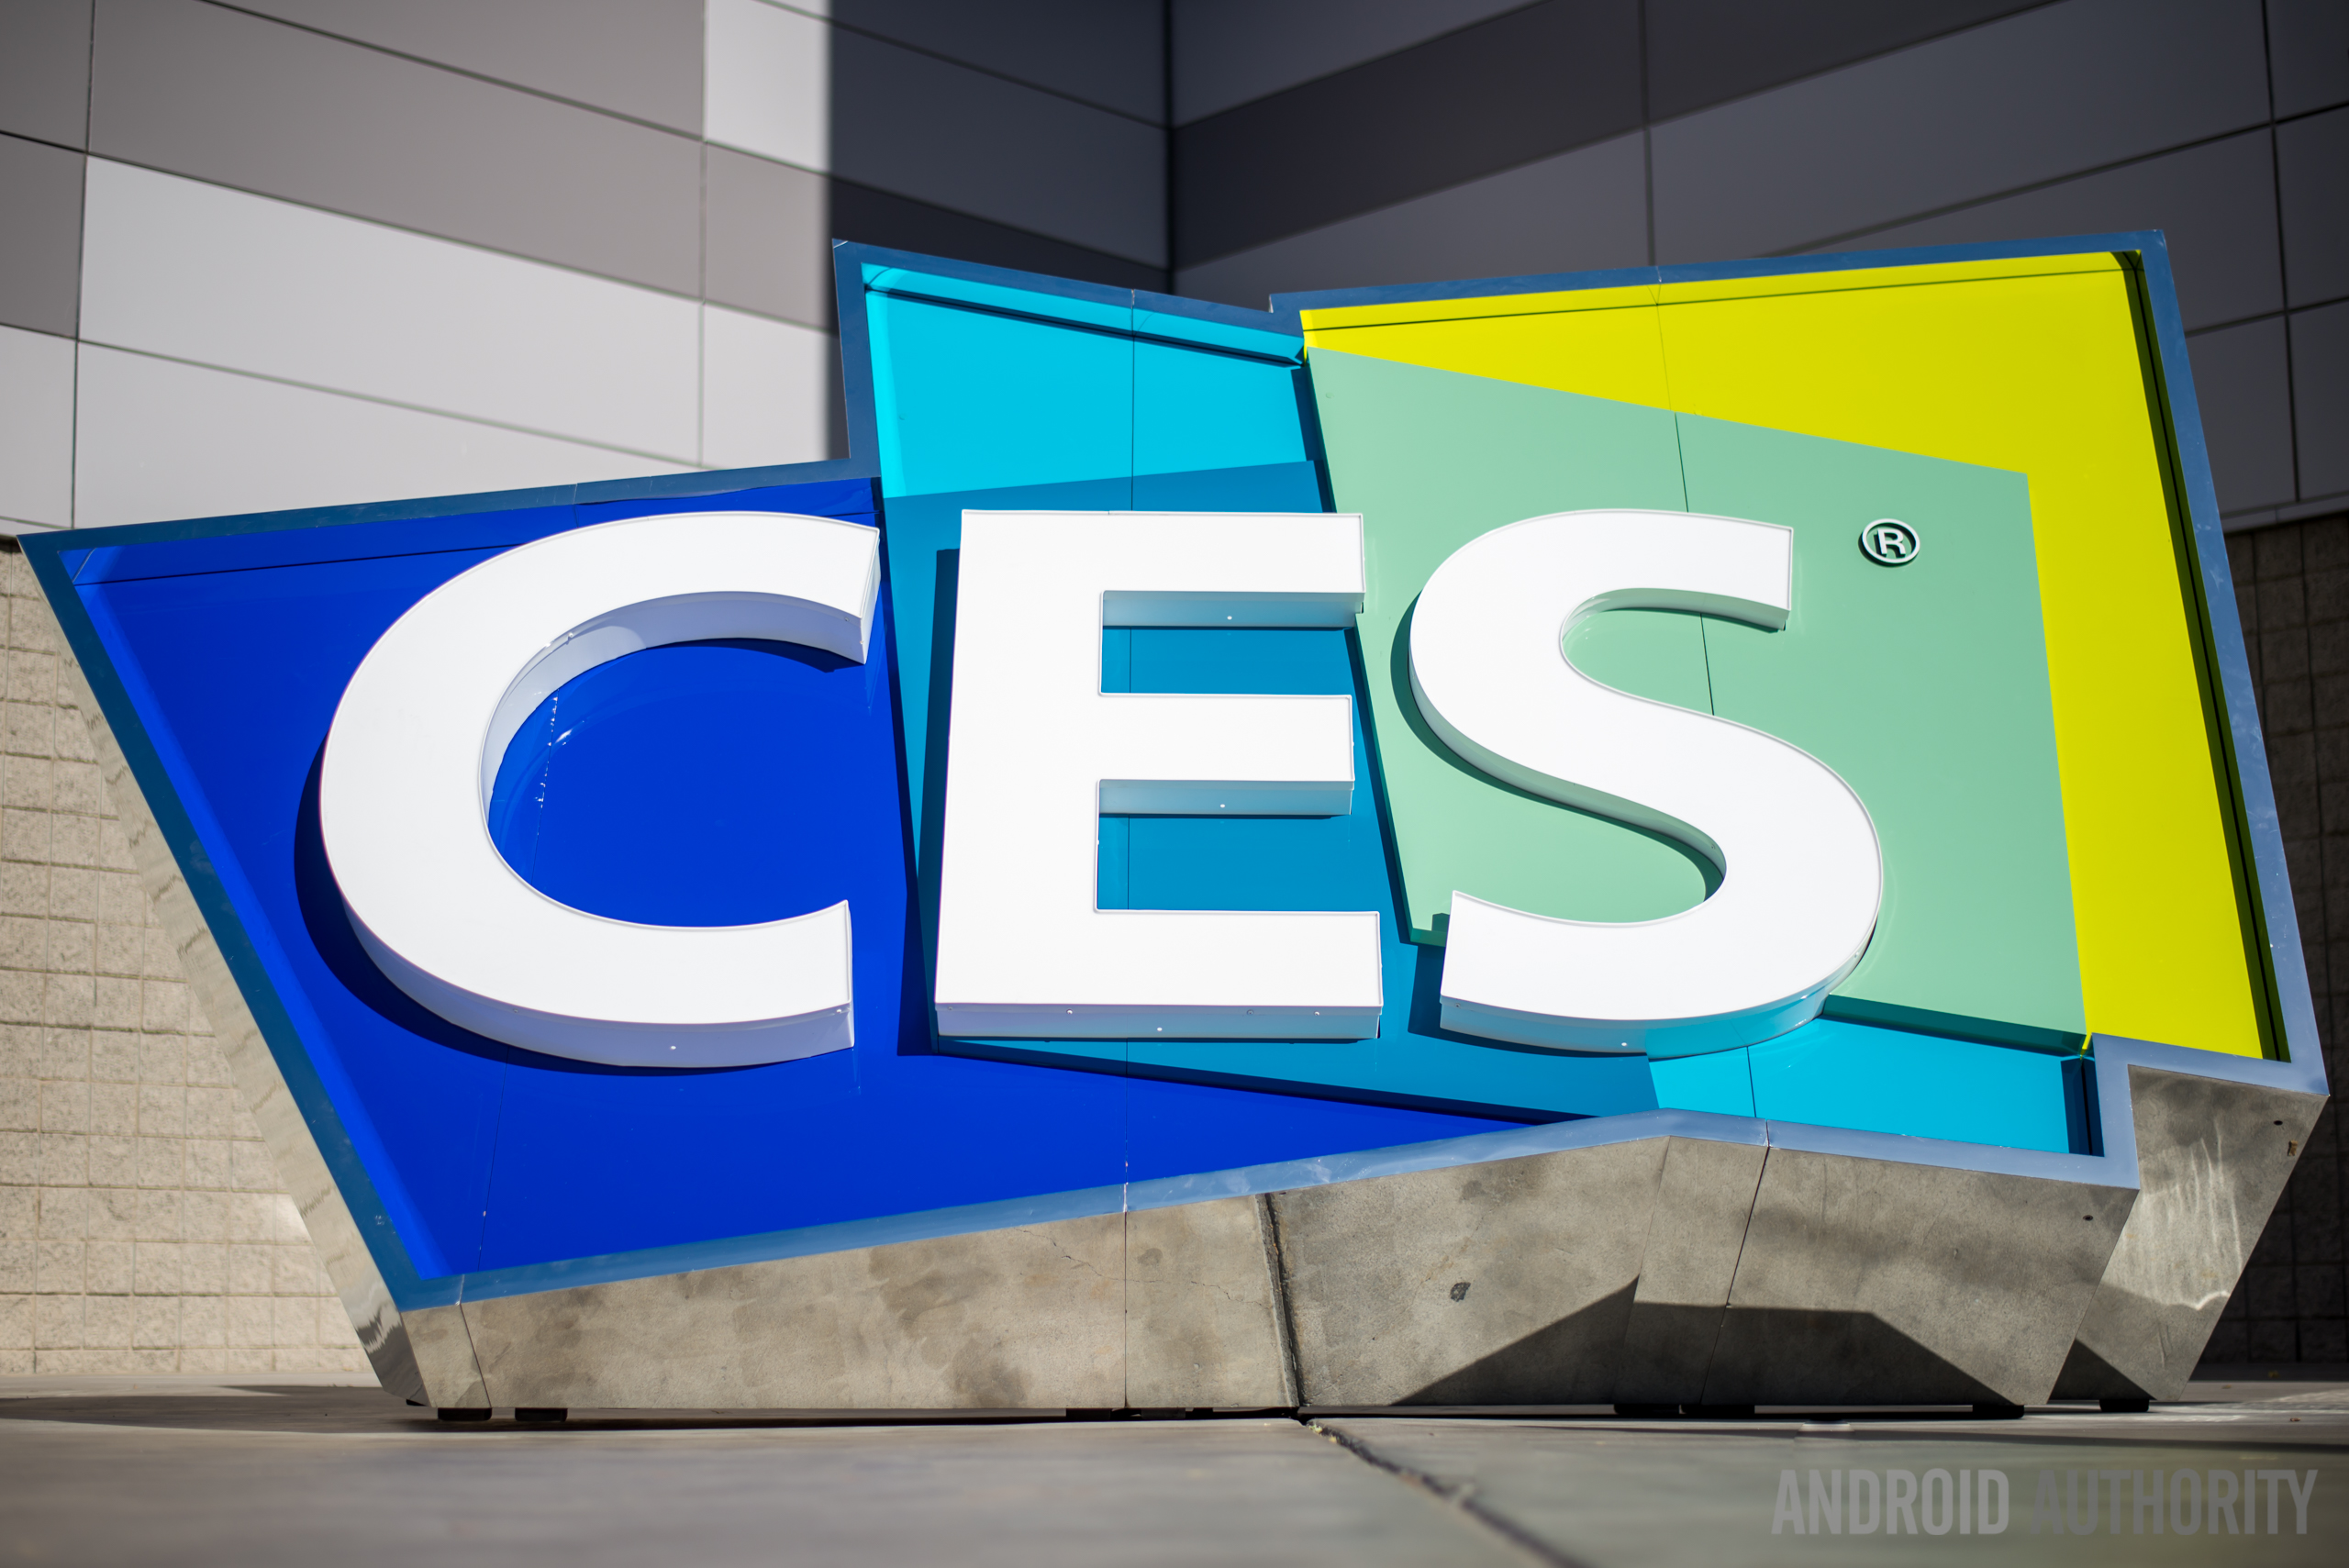 The CES logo from 2017.